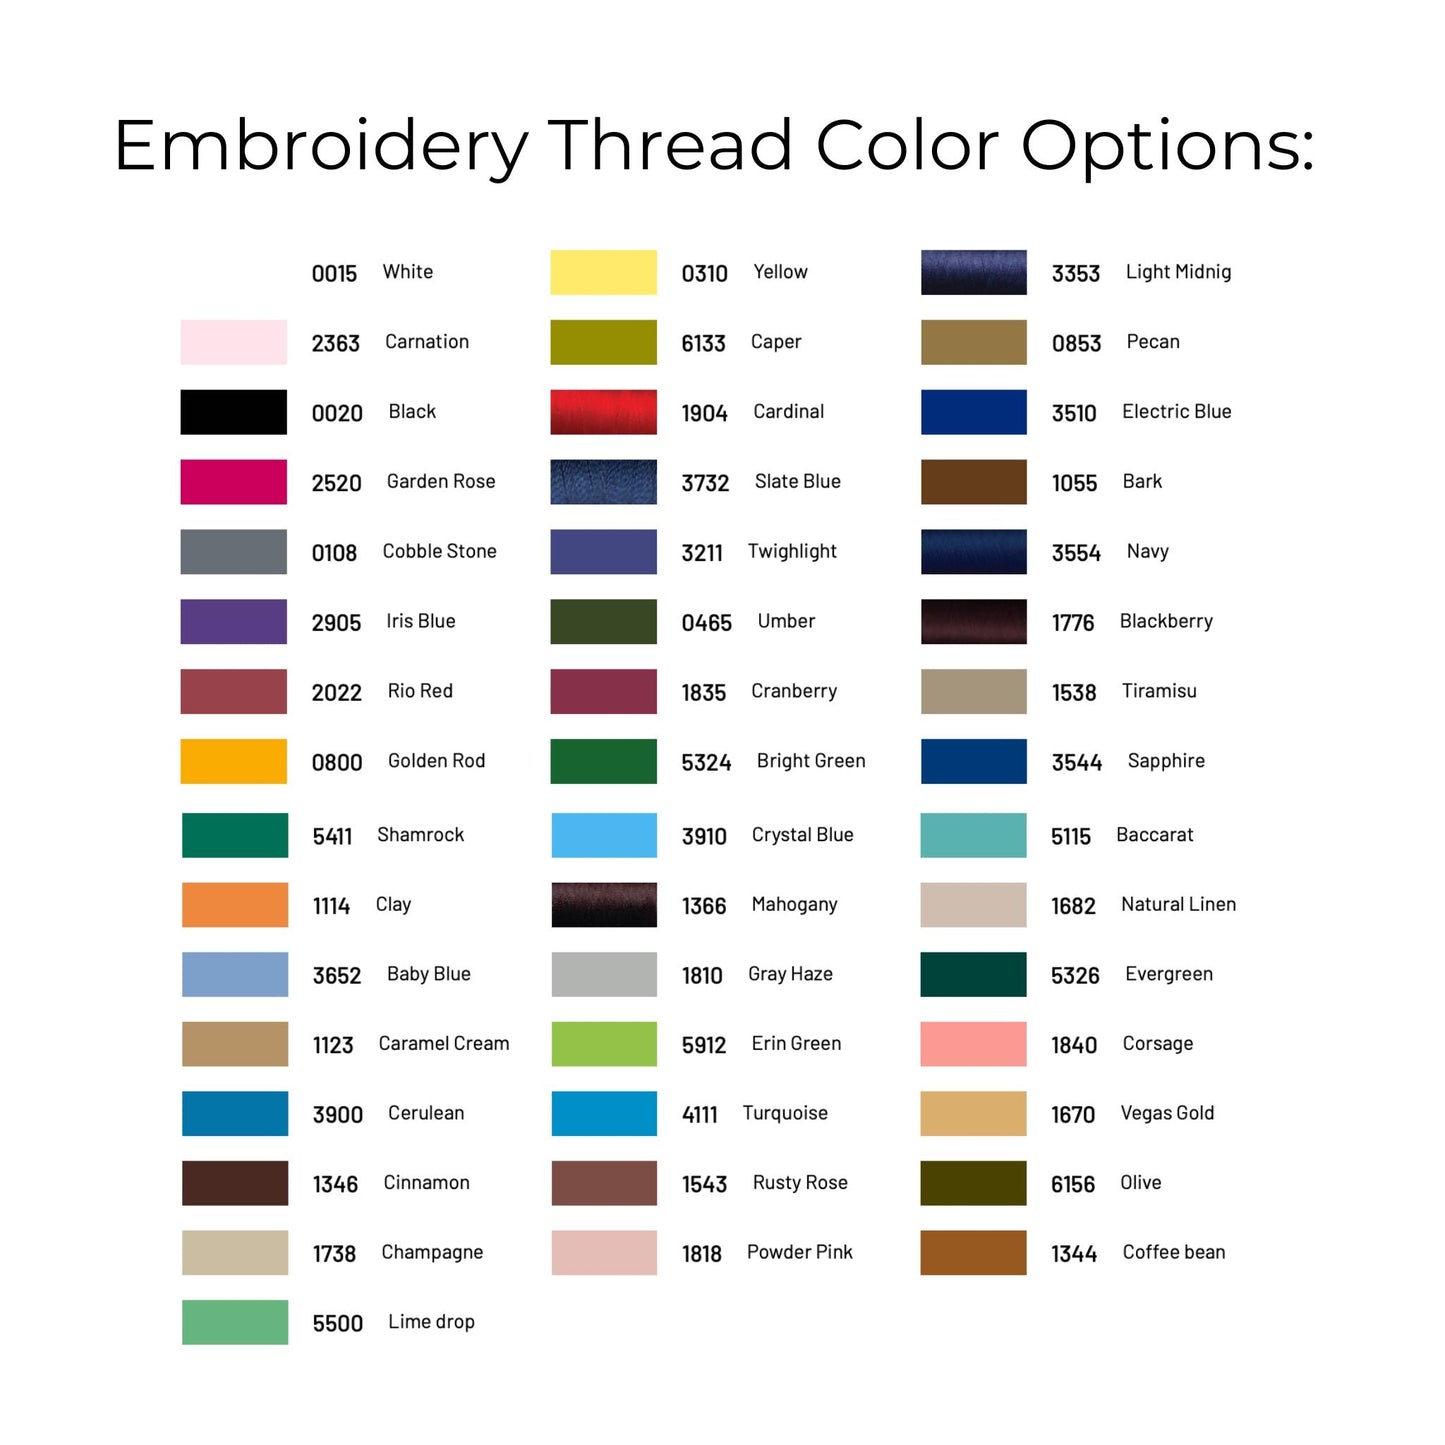 Embroidery thread color options by Winston's Collection